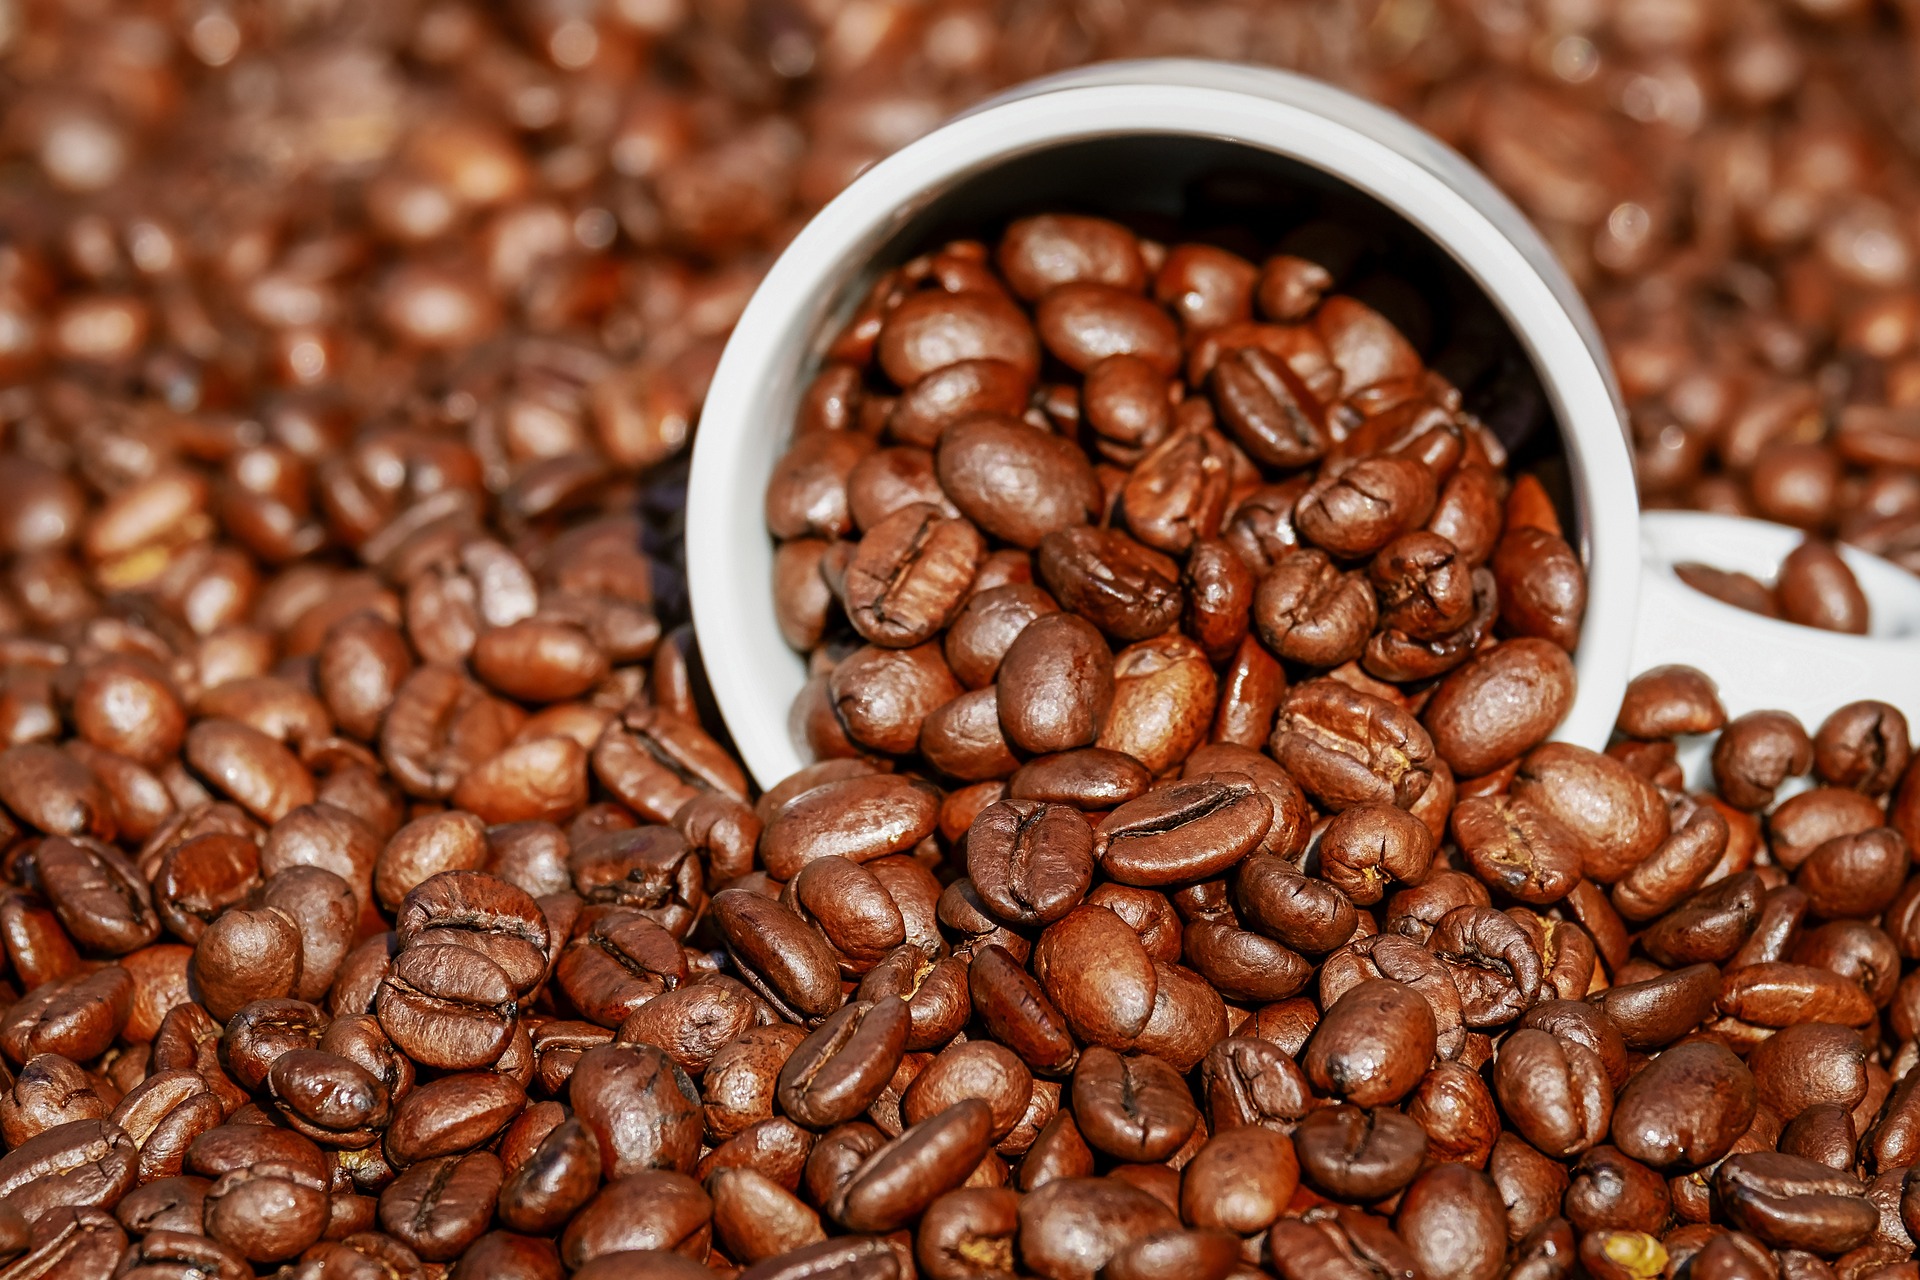 Brazil is the world's largest producer and second largest consumer of coffee